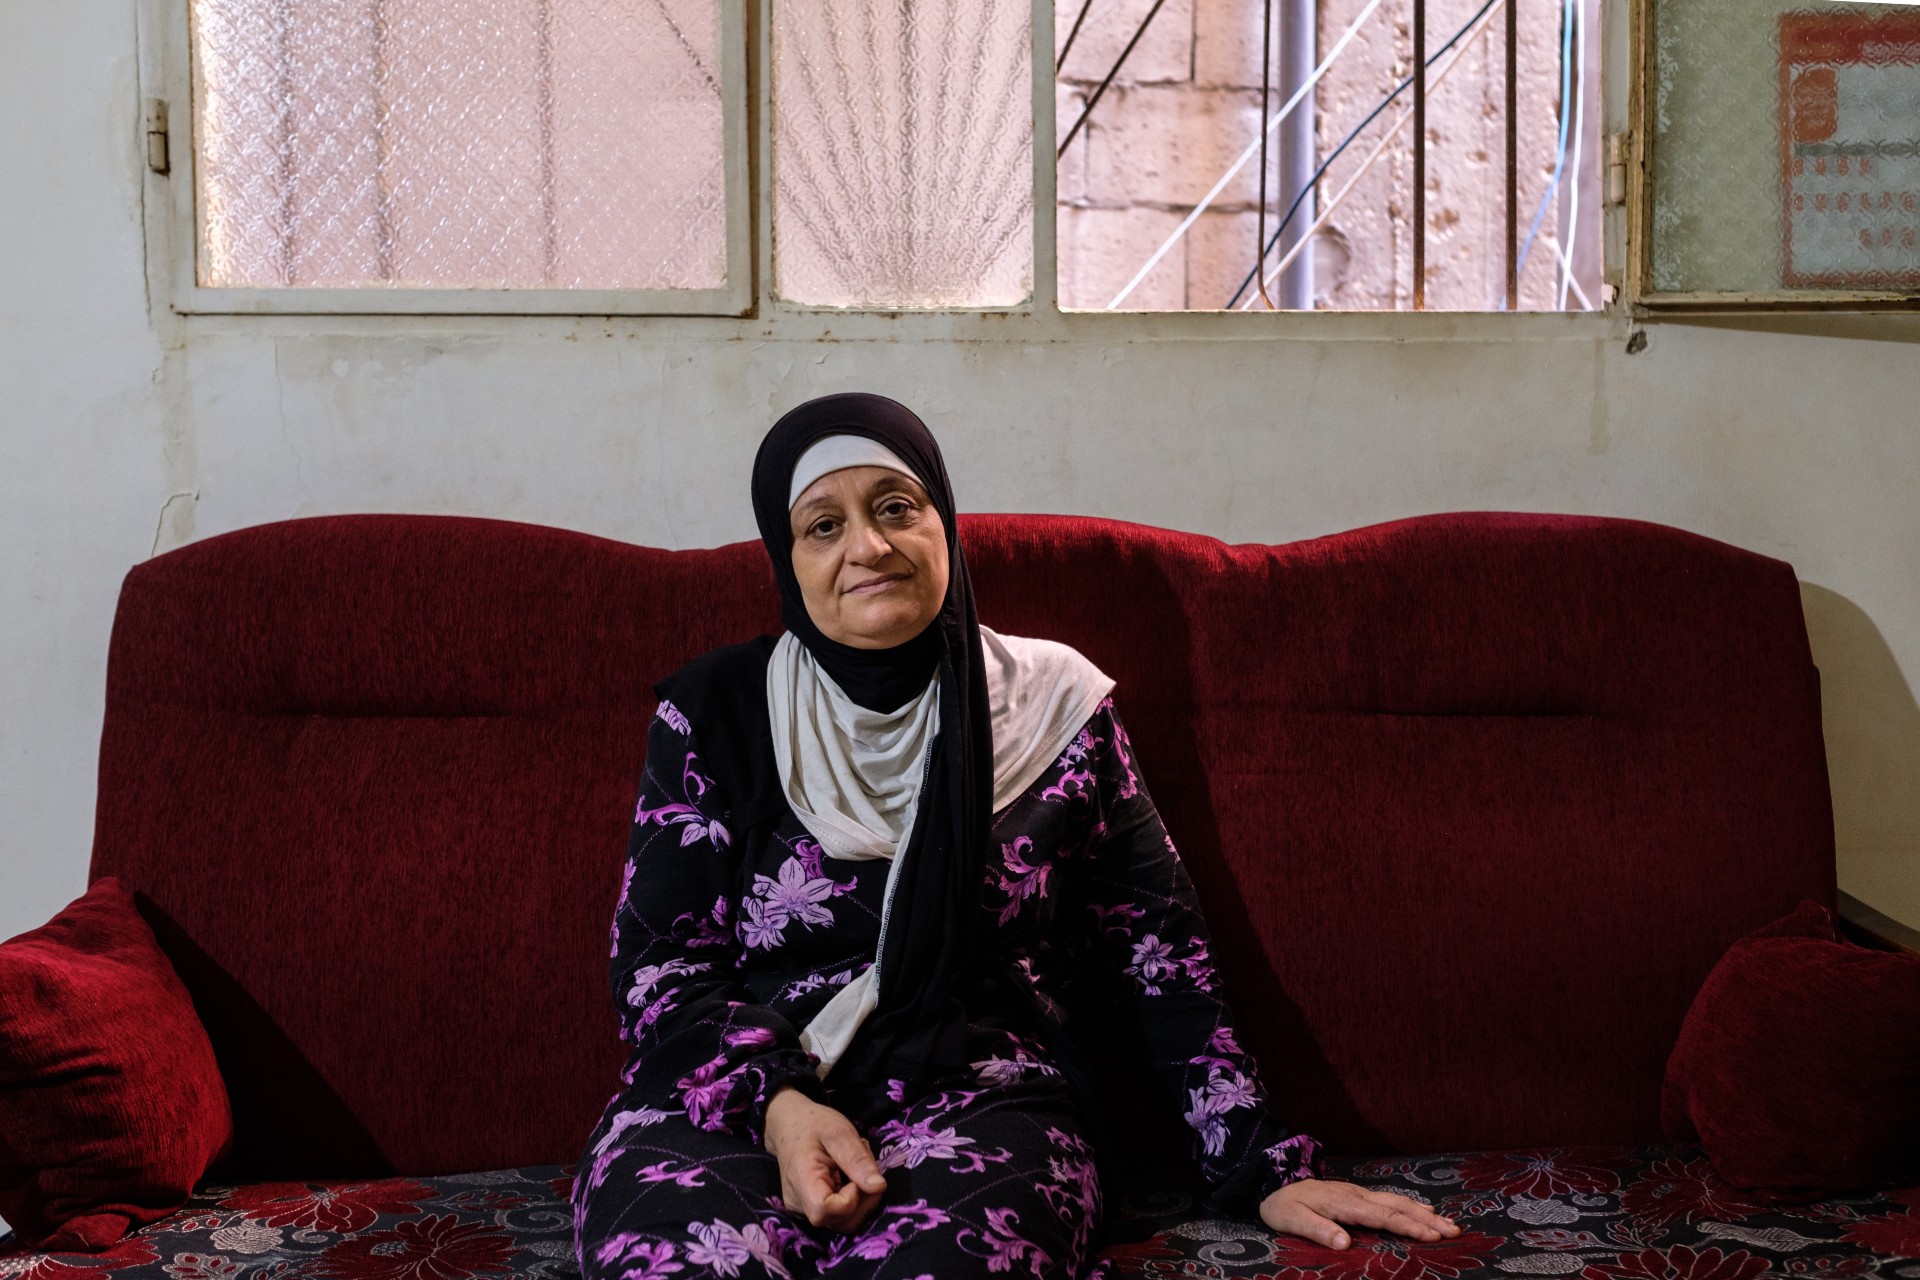 Rajaa Issa Ismael at her home in Shatila. She holds workshops for women's rights and raises awareness against violence (MEE/Rita Kabalan)